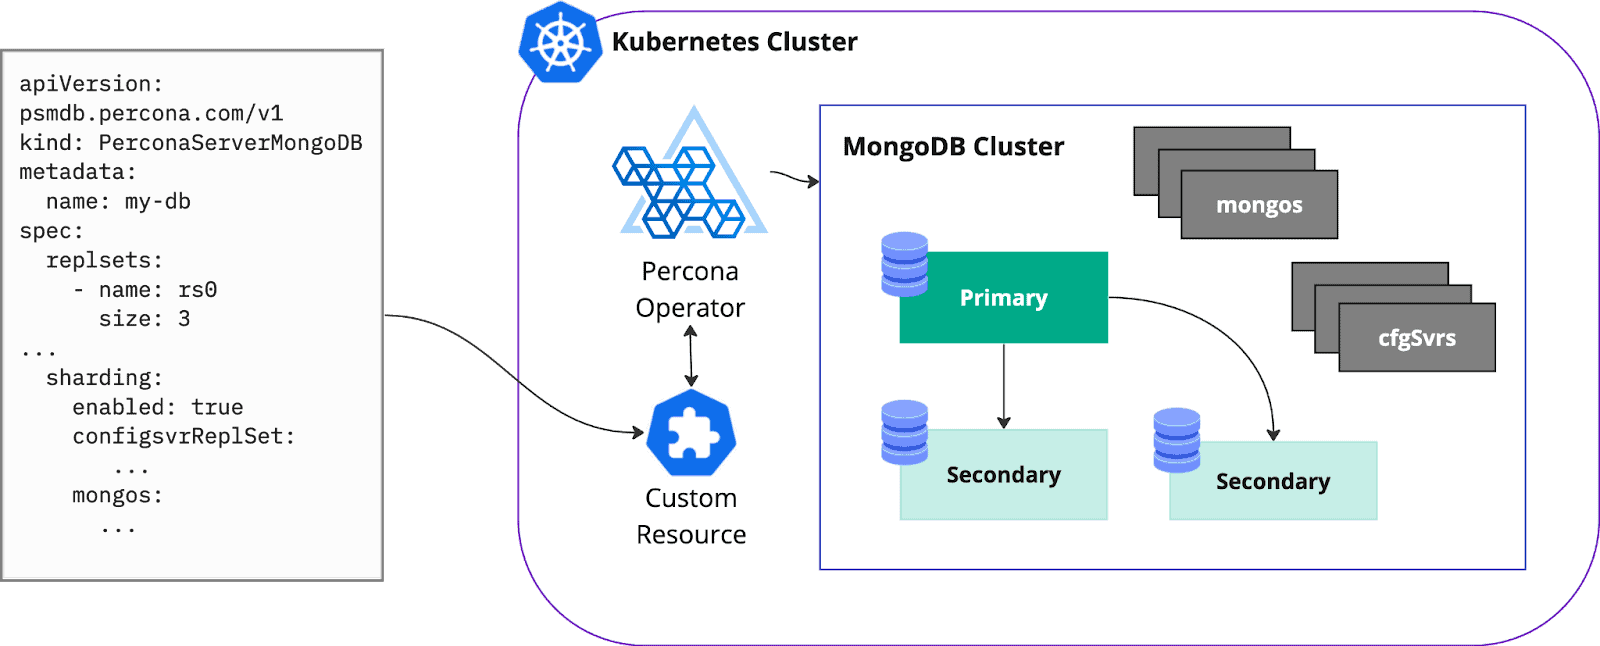 Code example for Kubernetes Cluster